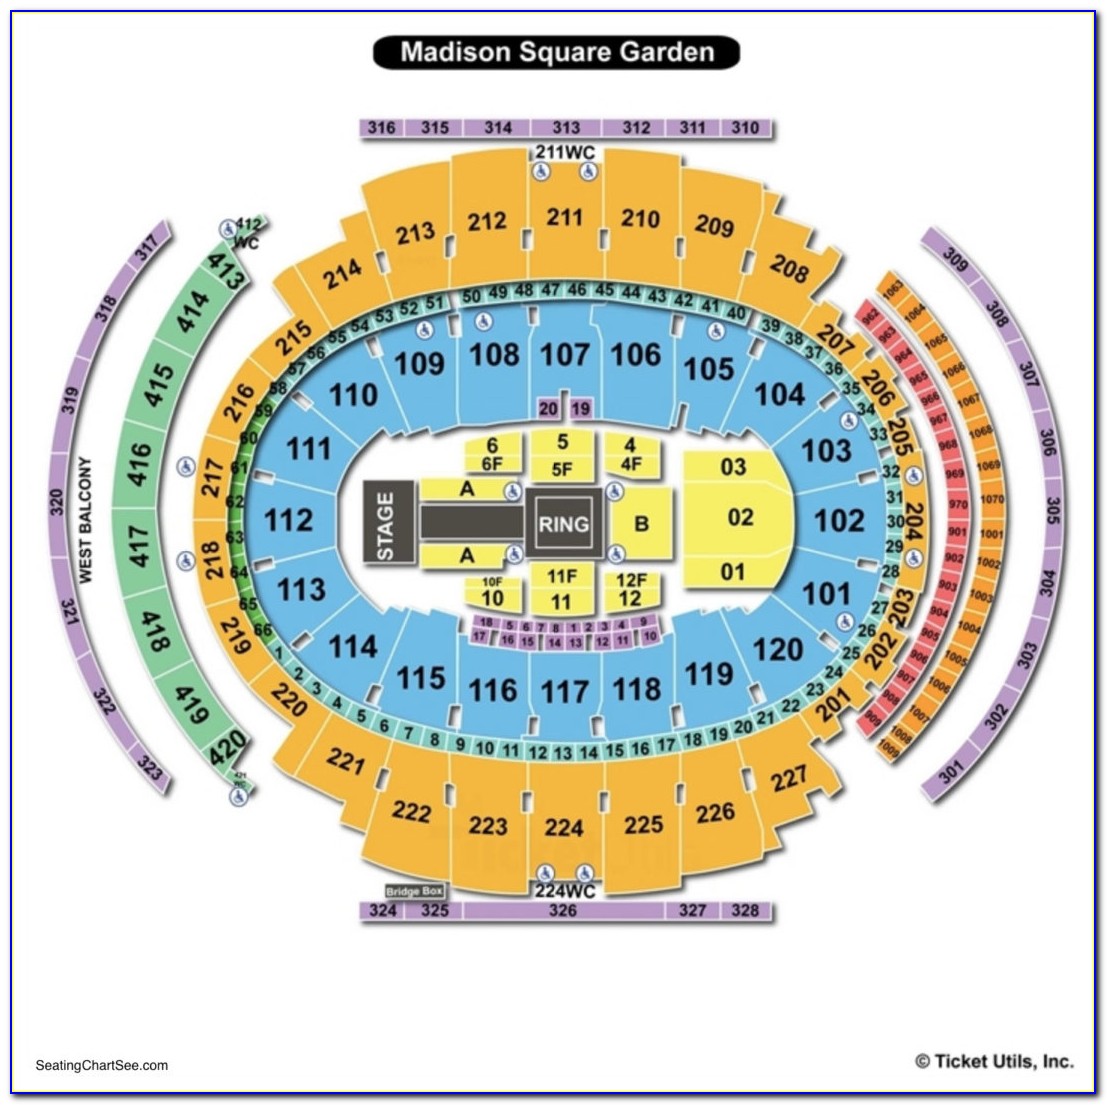 Madison Square Garden Concert Seating Map